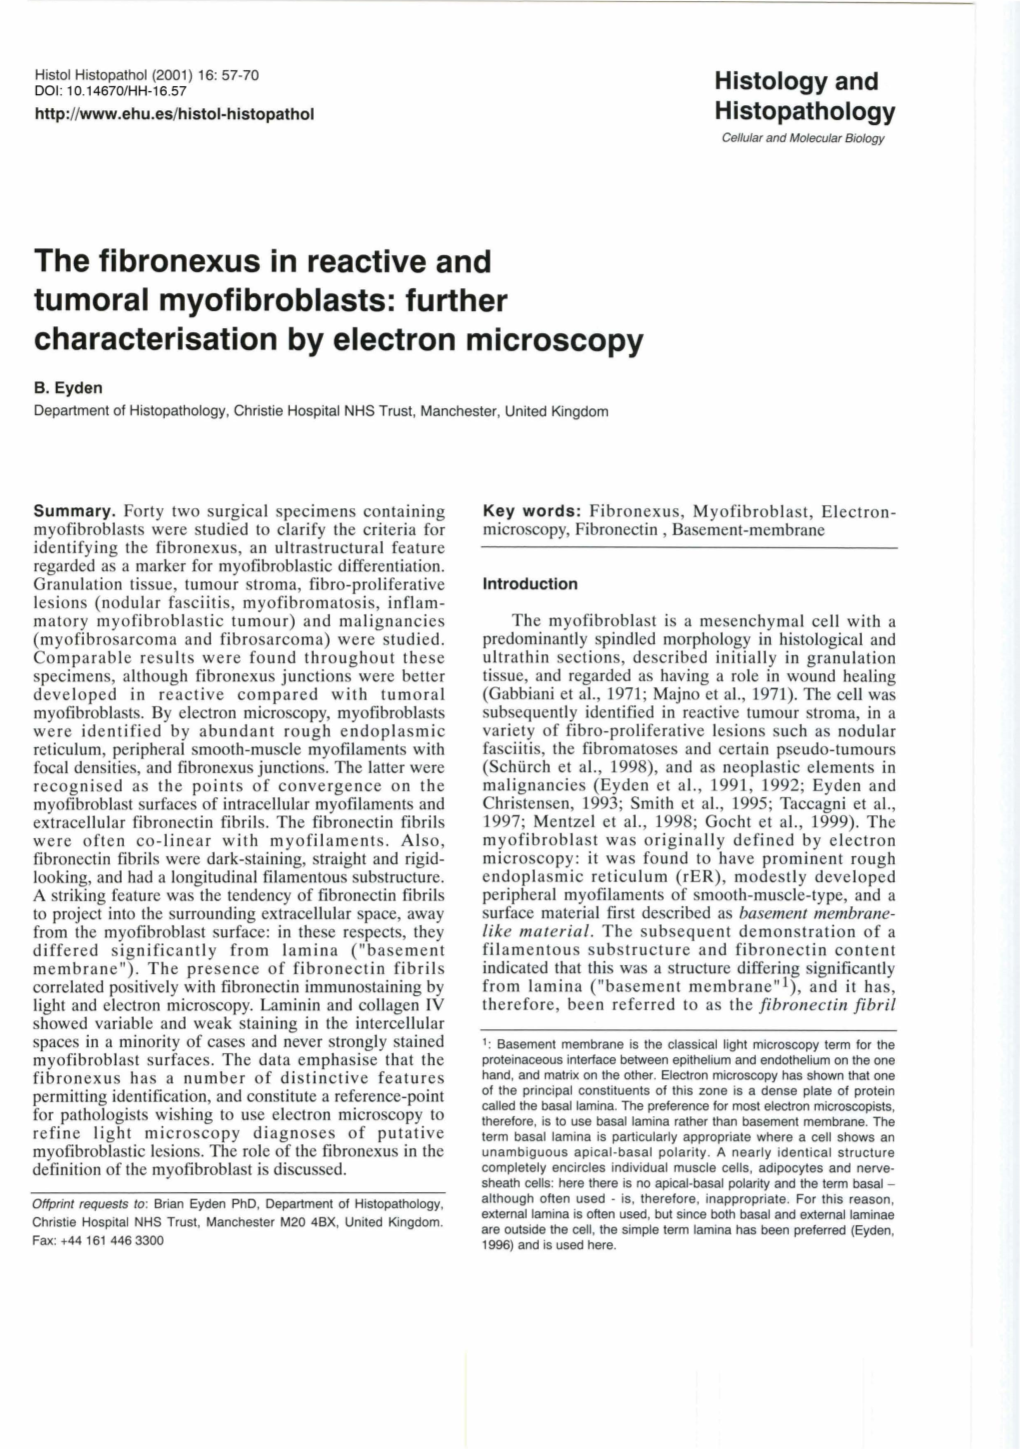 The Fibronexus in Reactive and Tumoral Myofibroblasts: Further Characterisation by Electron Microscopy